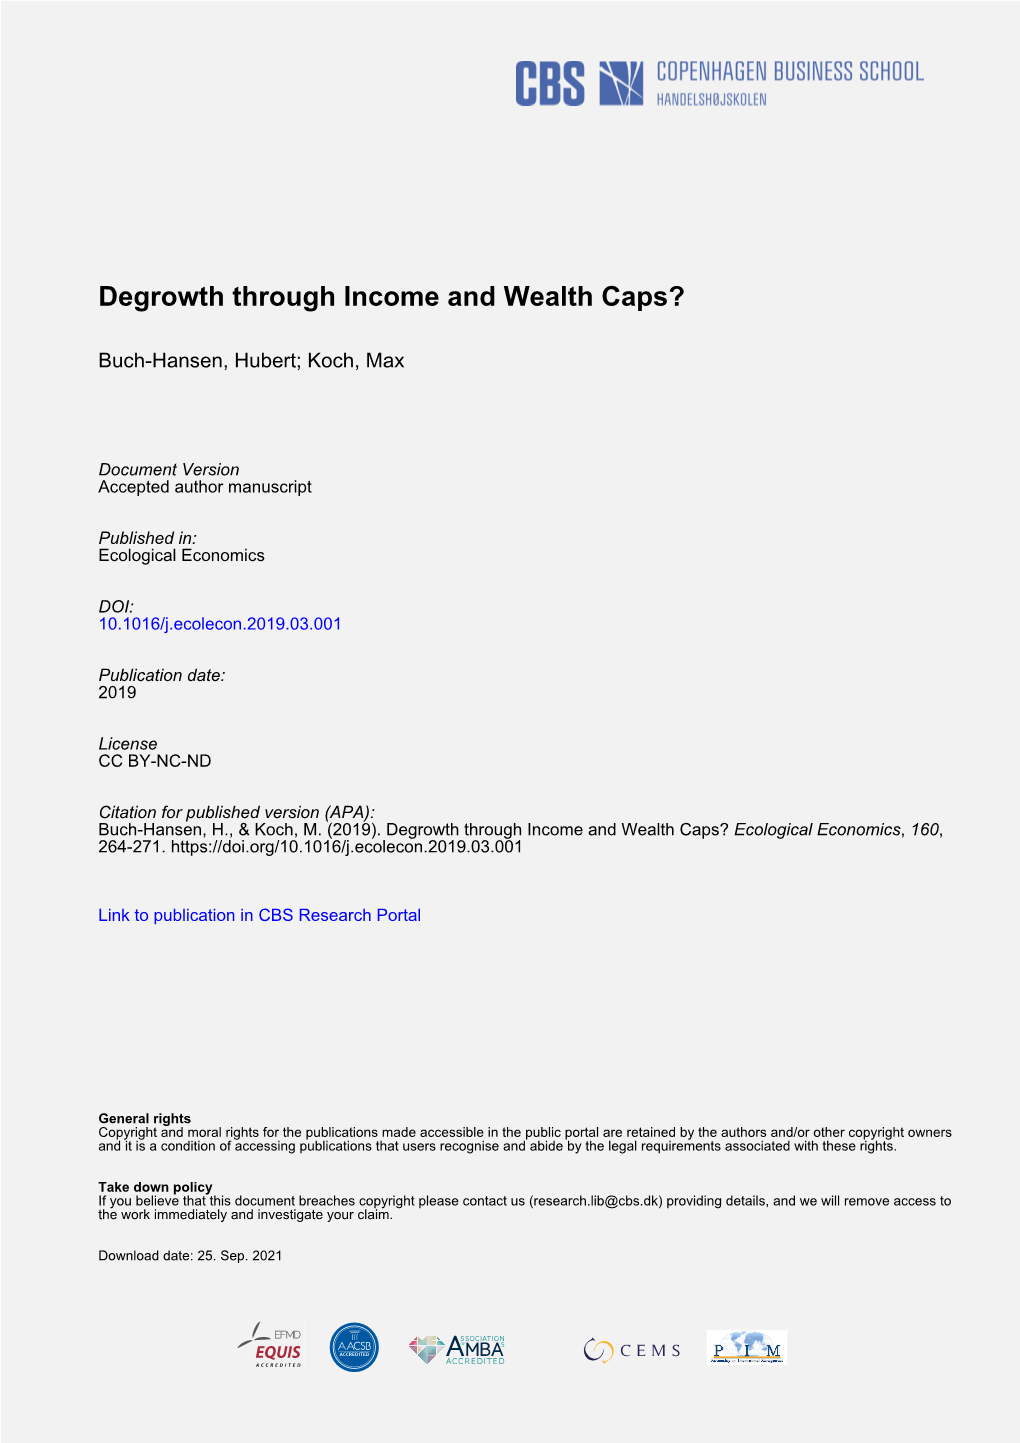 Degrowth Through Income and Wealth Caps?